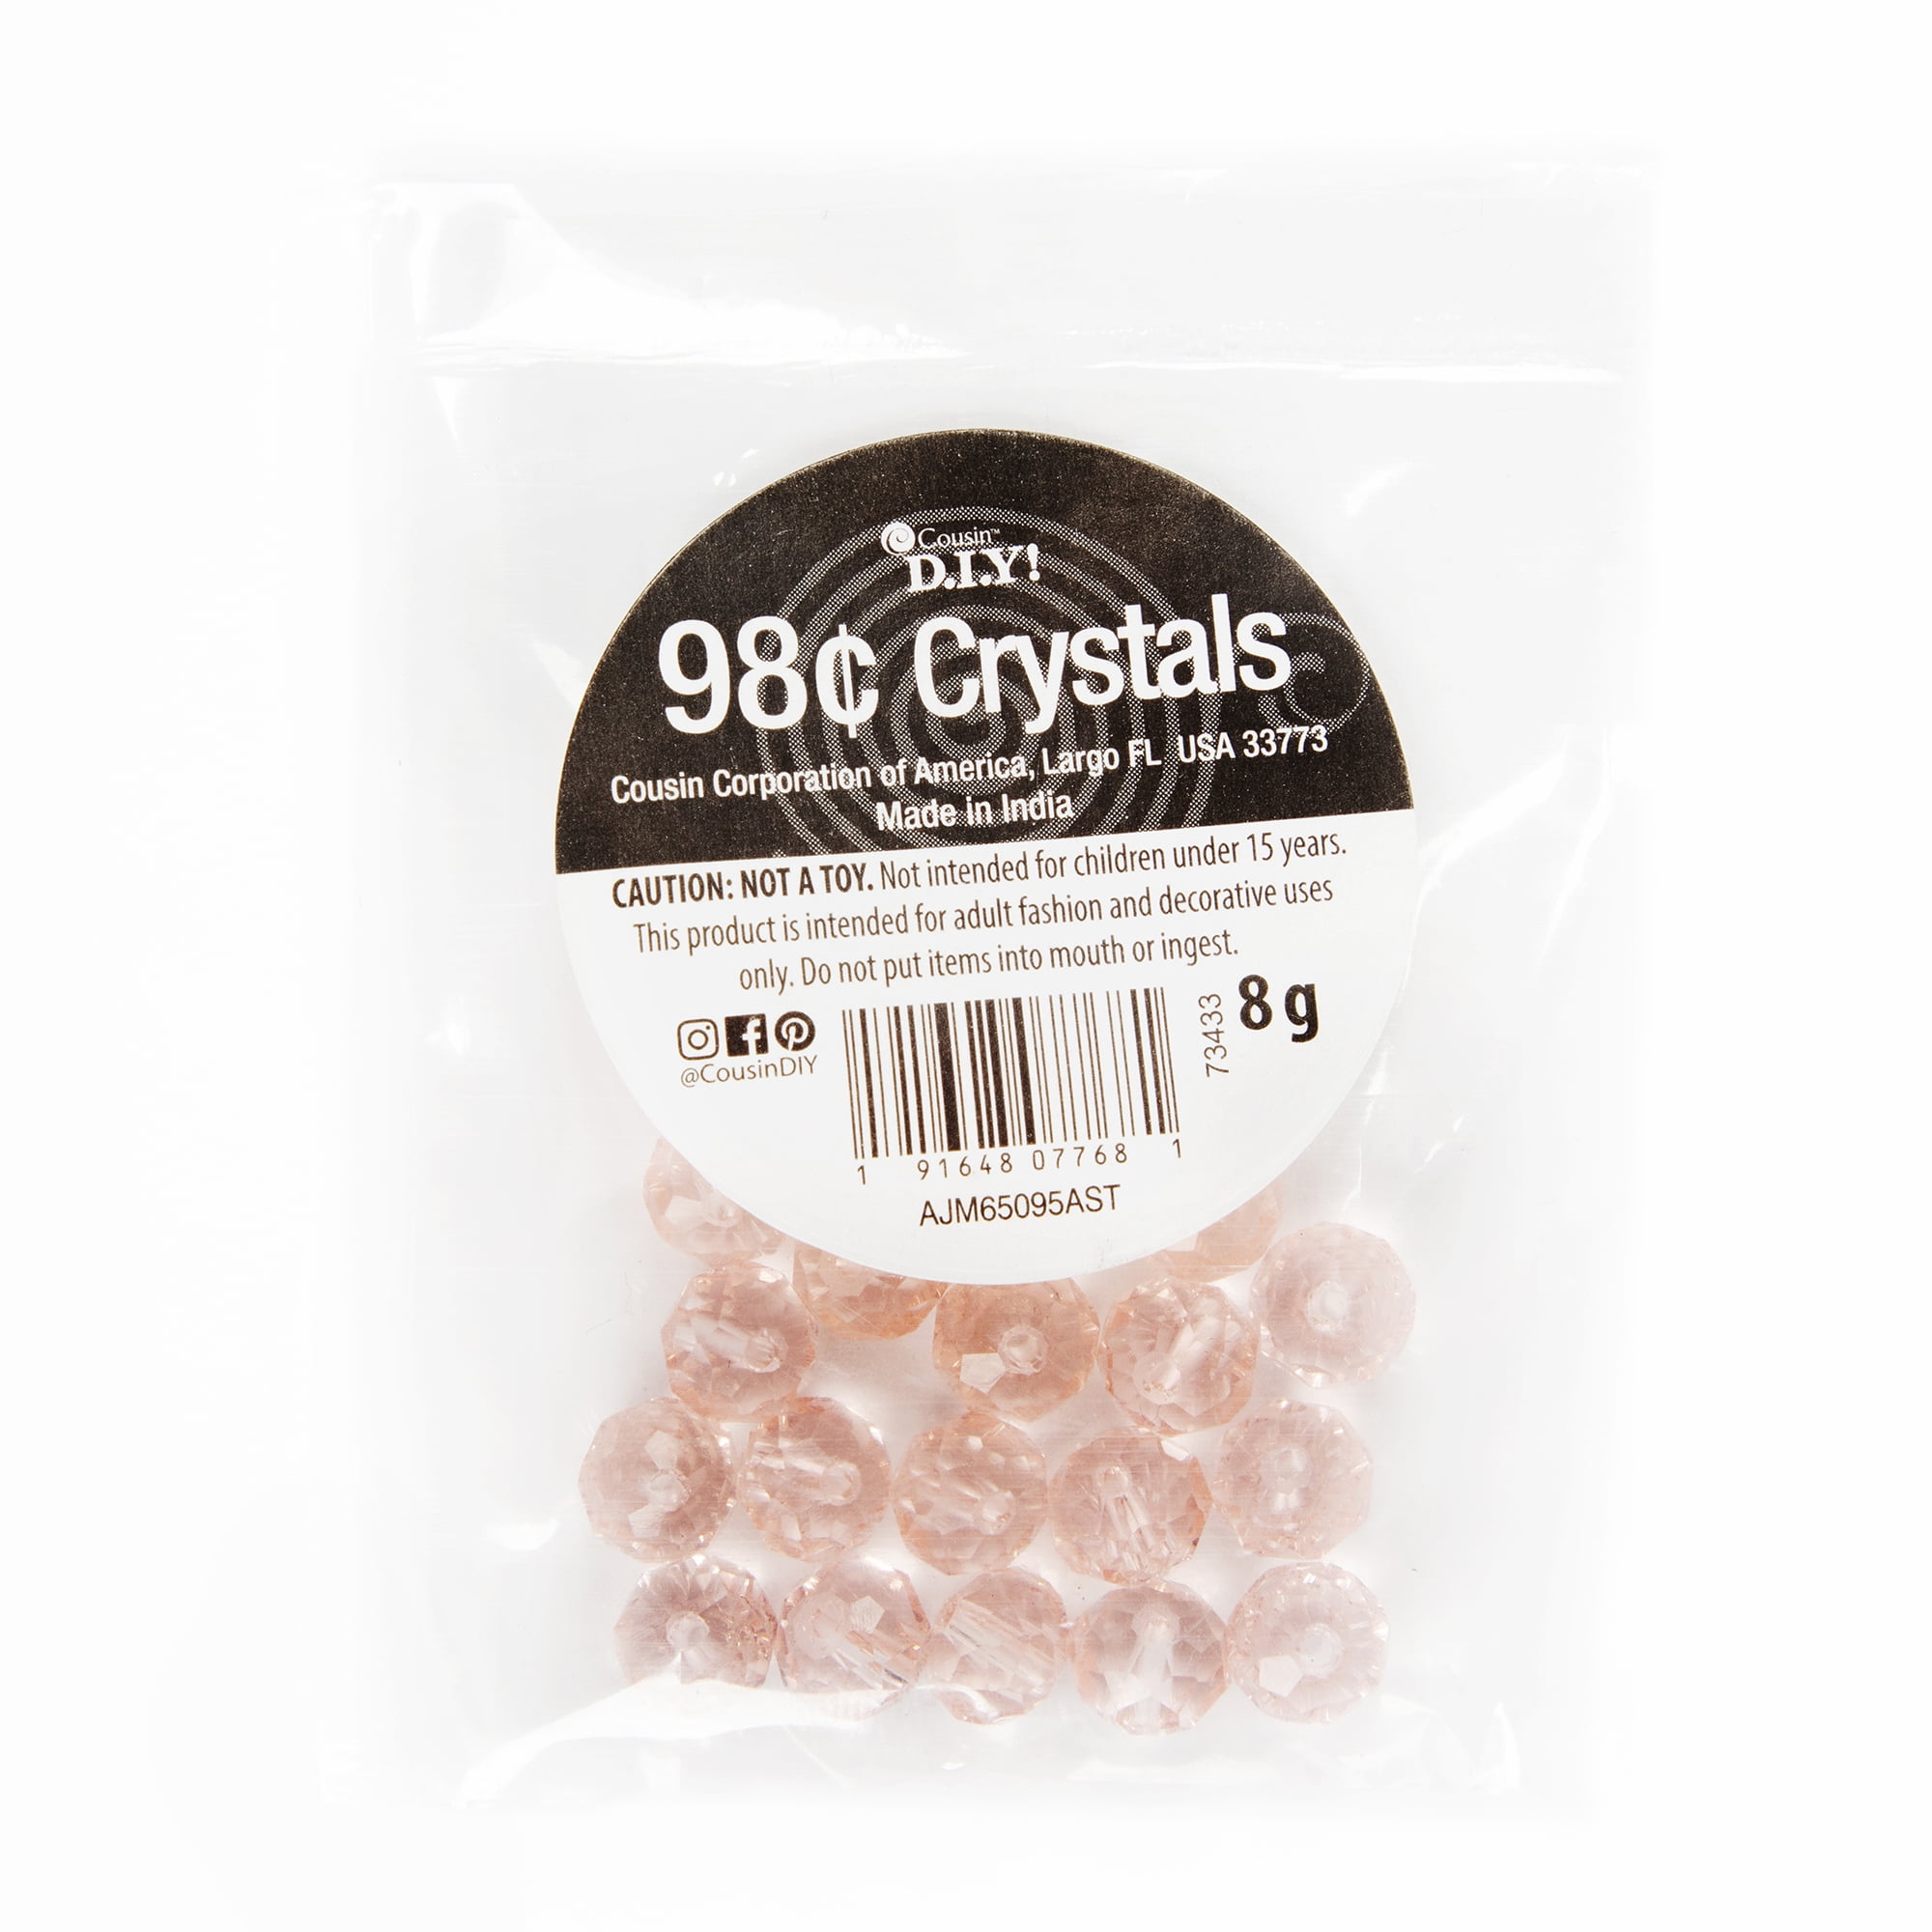 Cousin DIY $.98 Light Colored Crystal Bead Assortment for Jewelry Making, 8g